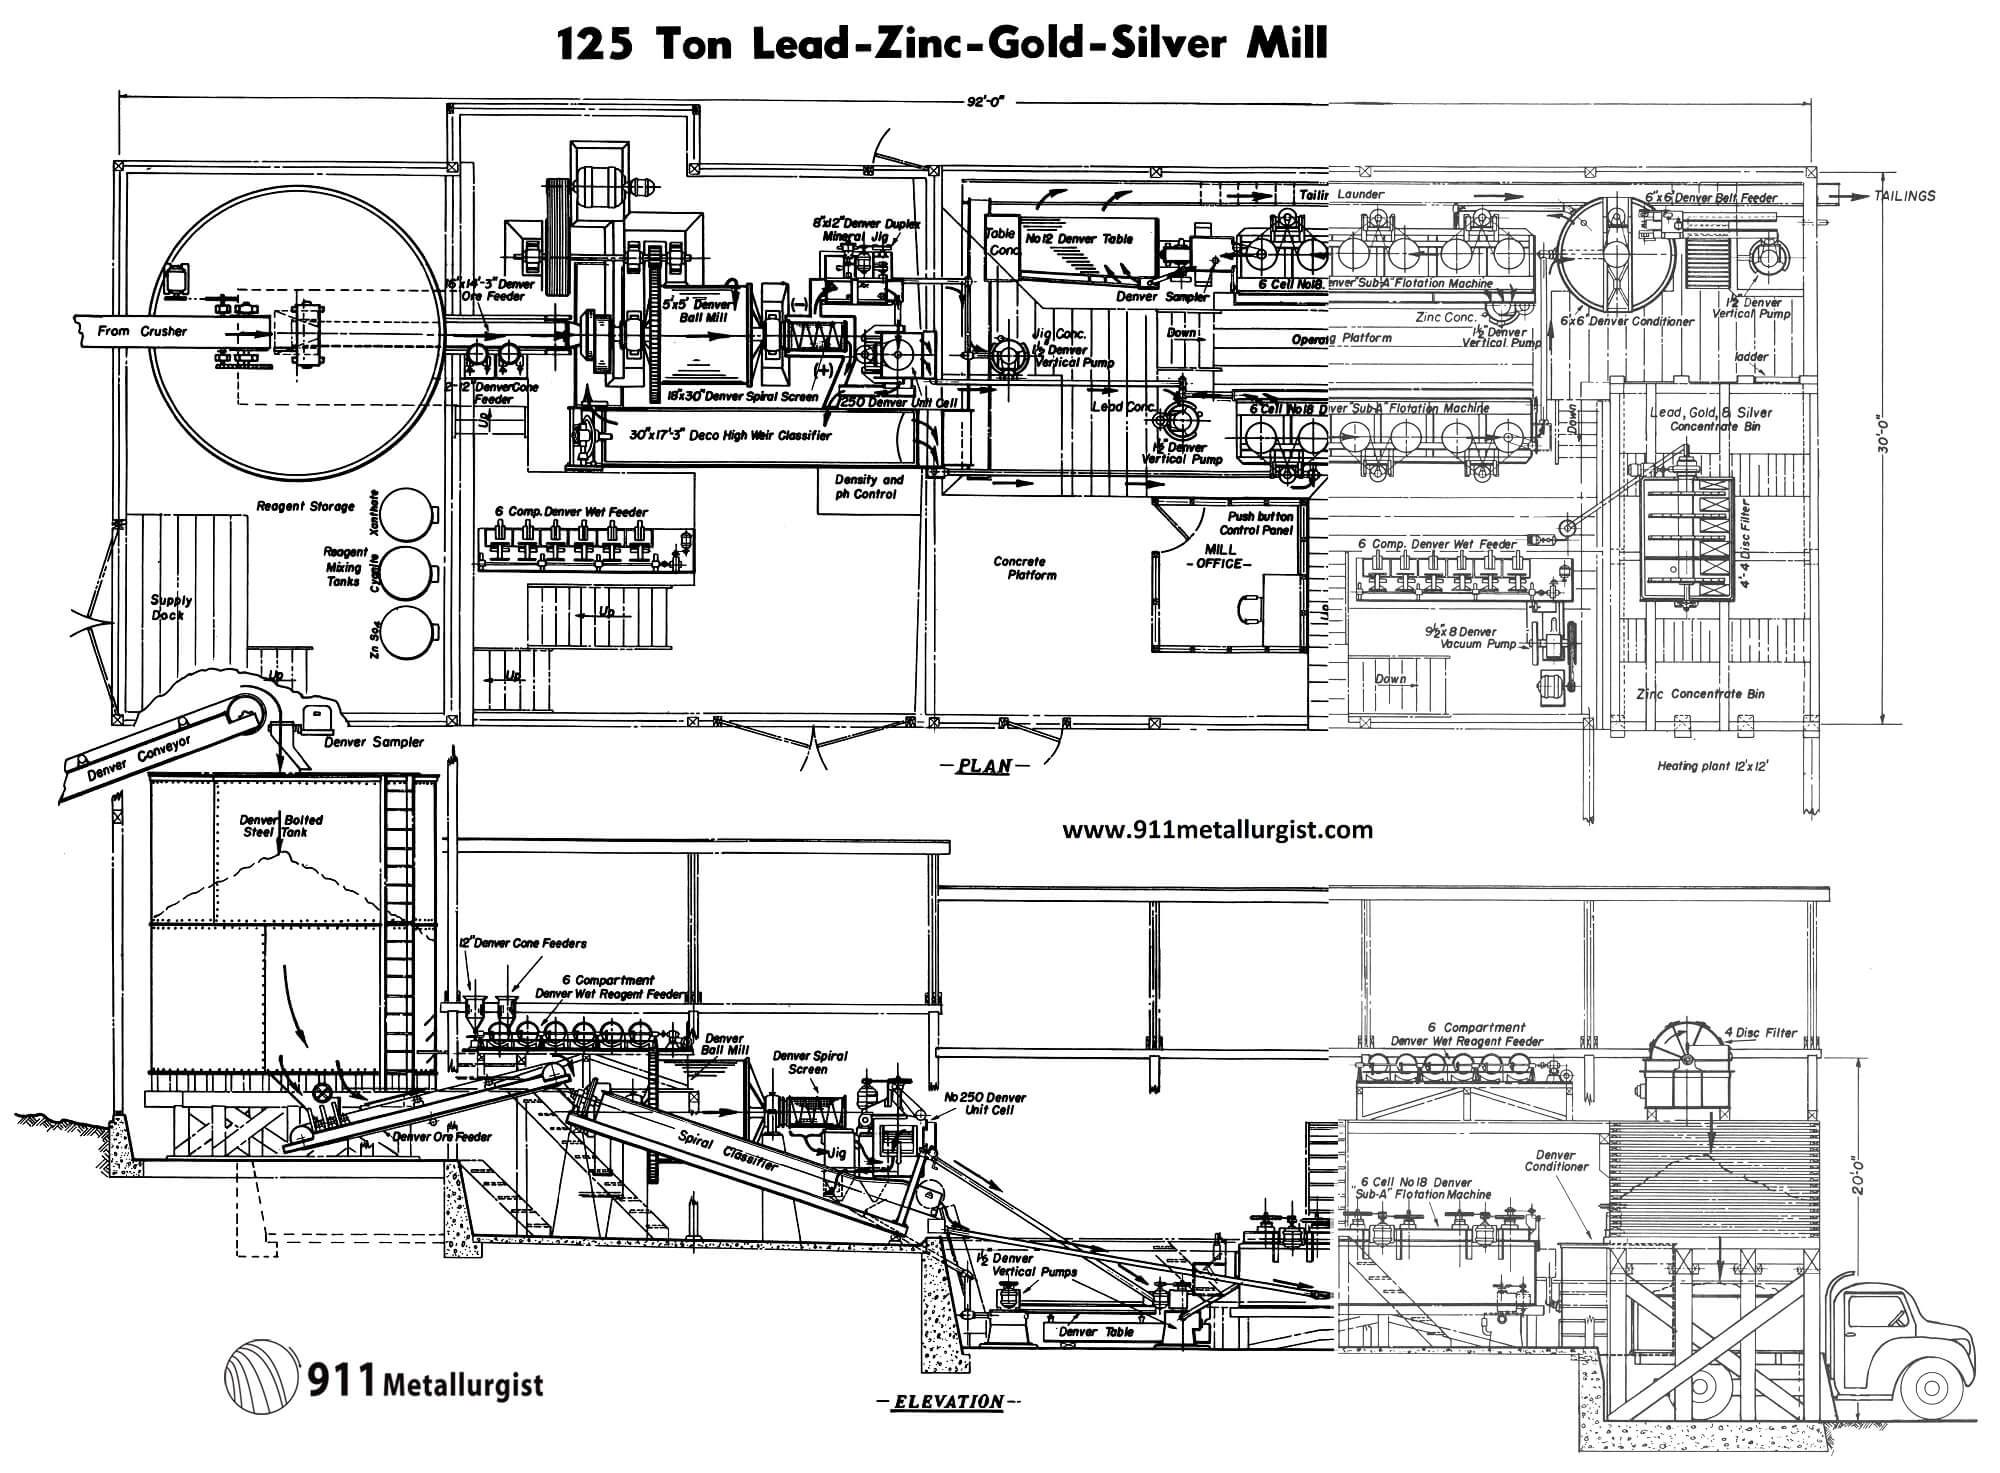 Layout of a Small Lead Zinc Silver Gold Processing Plant